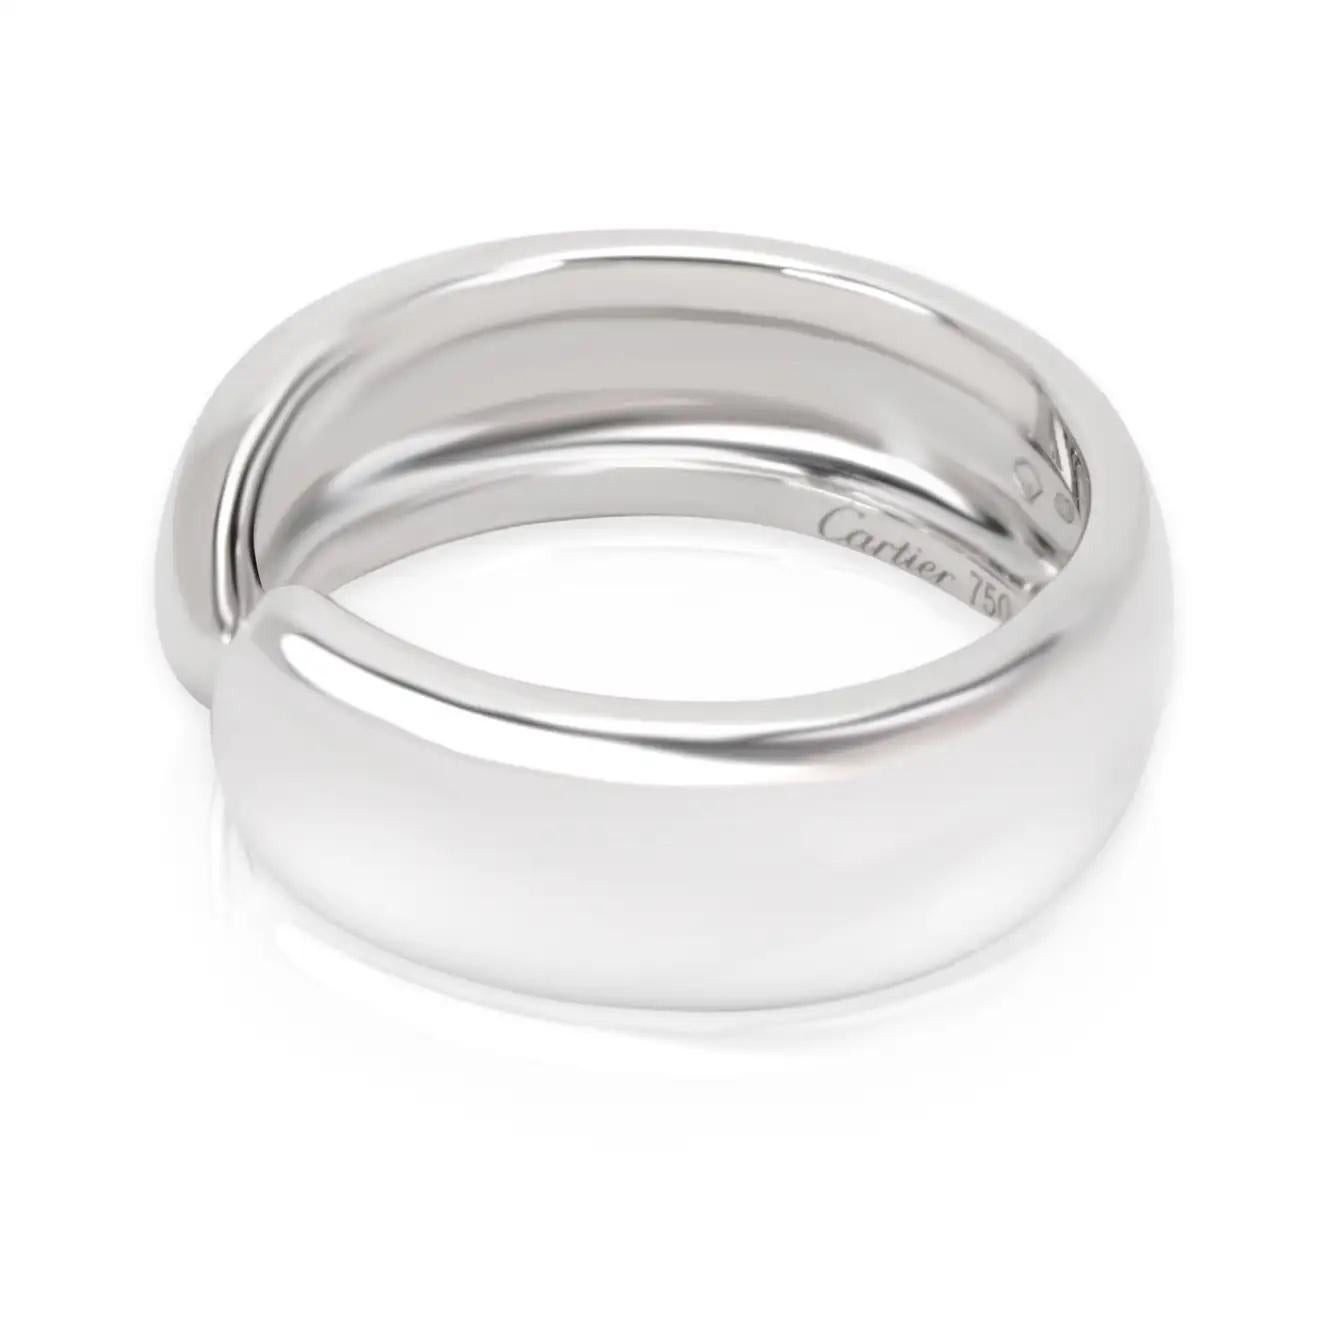 This classy Cartier C profile ring has a timeless feel and appeal. Featuring a high polished embellished C logo at the sides of each opening this 18k white gold ring is a classic piece of jewelry that will always remain in style. The ring weighs